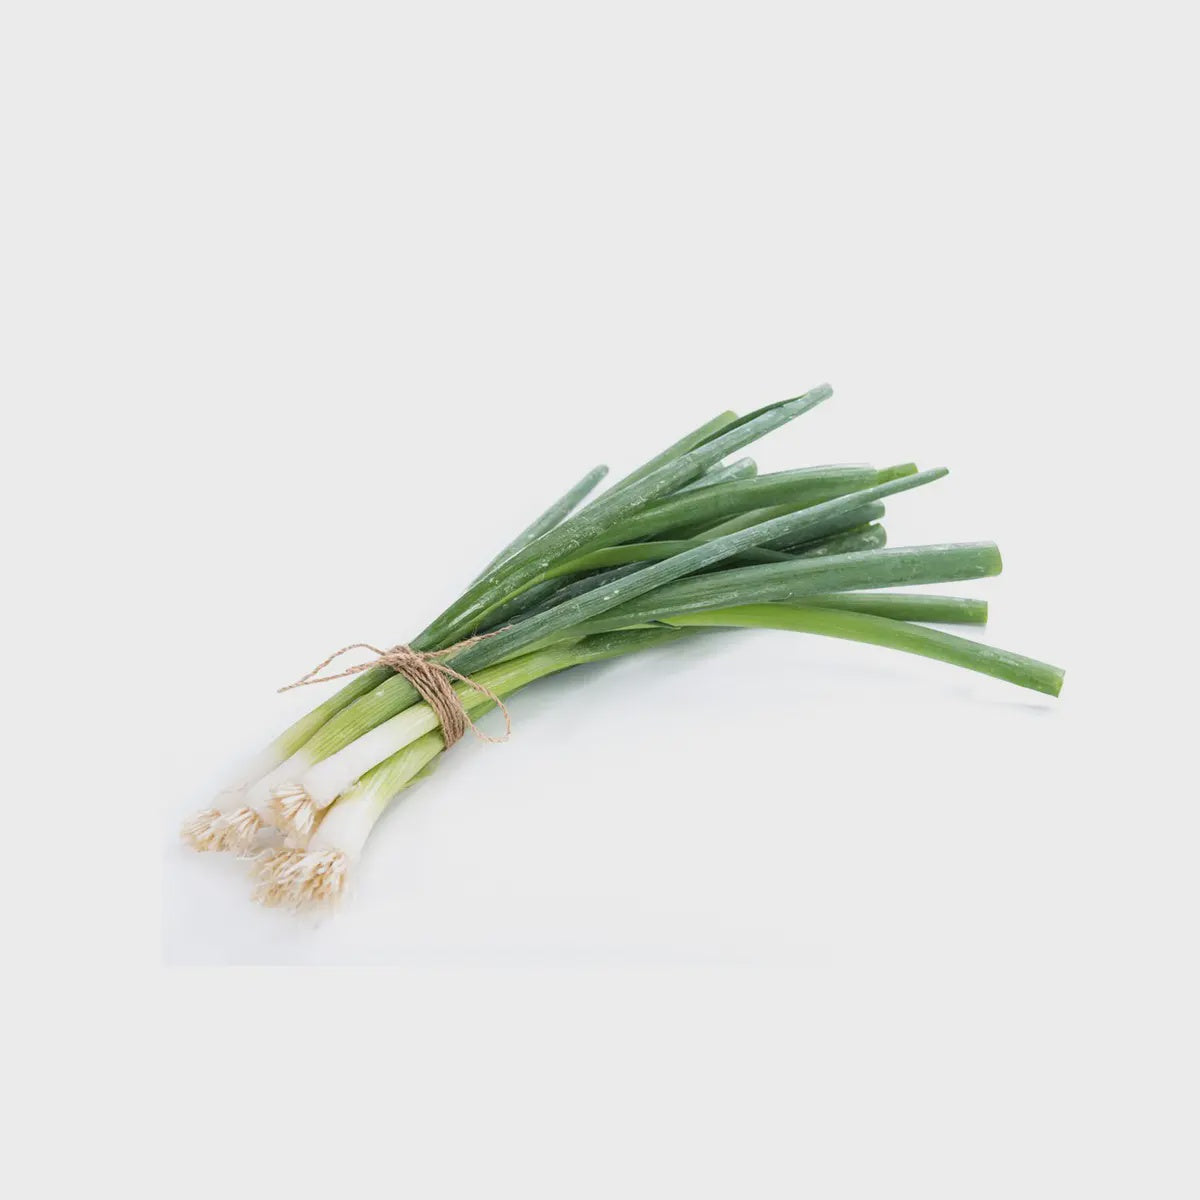 Shallots/Spring Onion Per Bunch